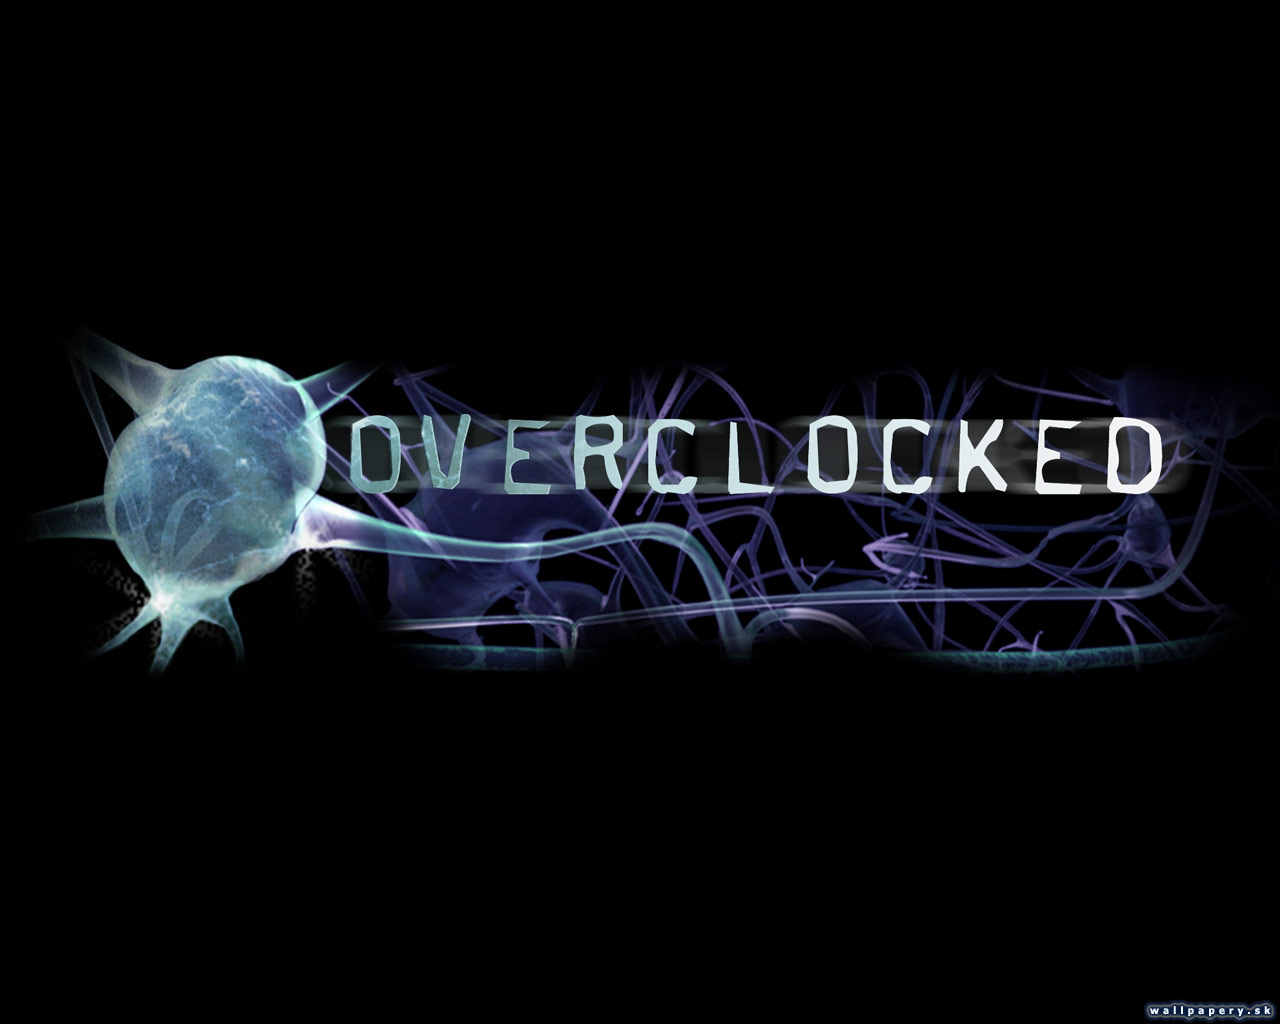 Overclocked: A History of Violence - wallpaper 5